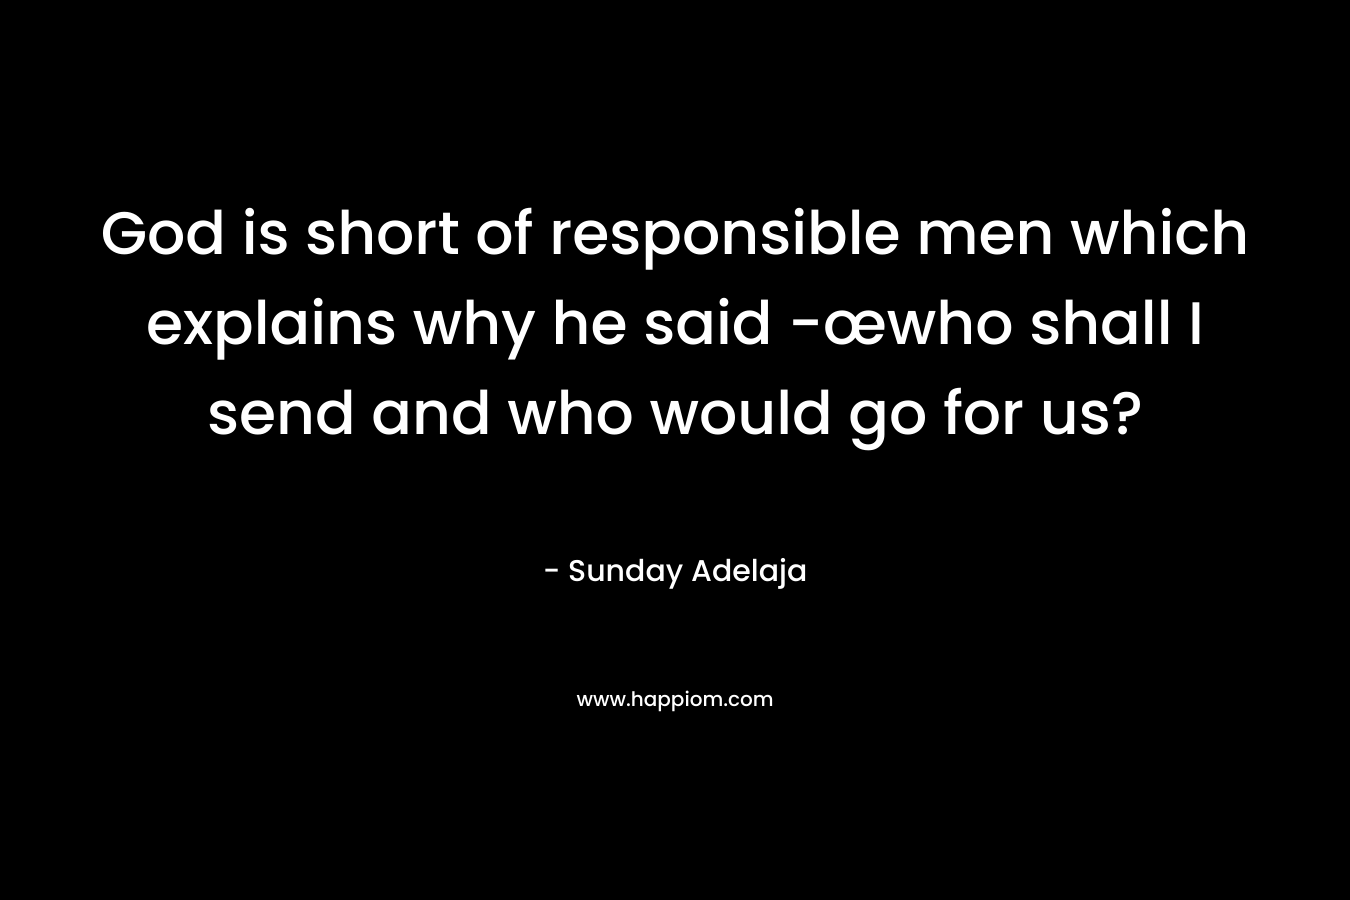 God is short of responsible men which explains why he said -œwho shall I send and who would go for us?